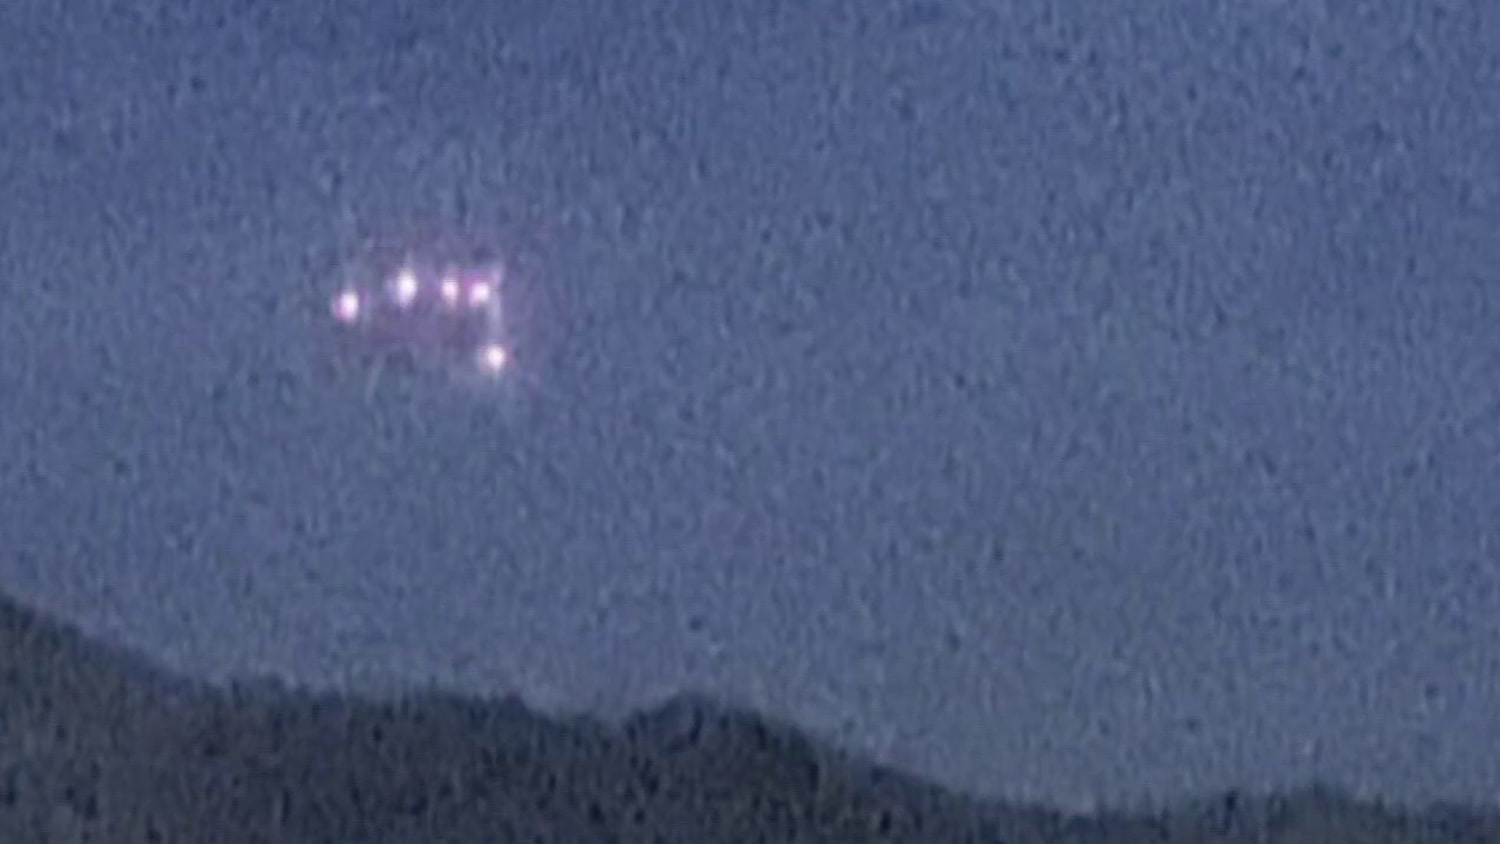 Group investigates mystery triangle UFO spotted above U.S. marine base